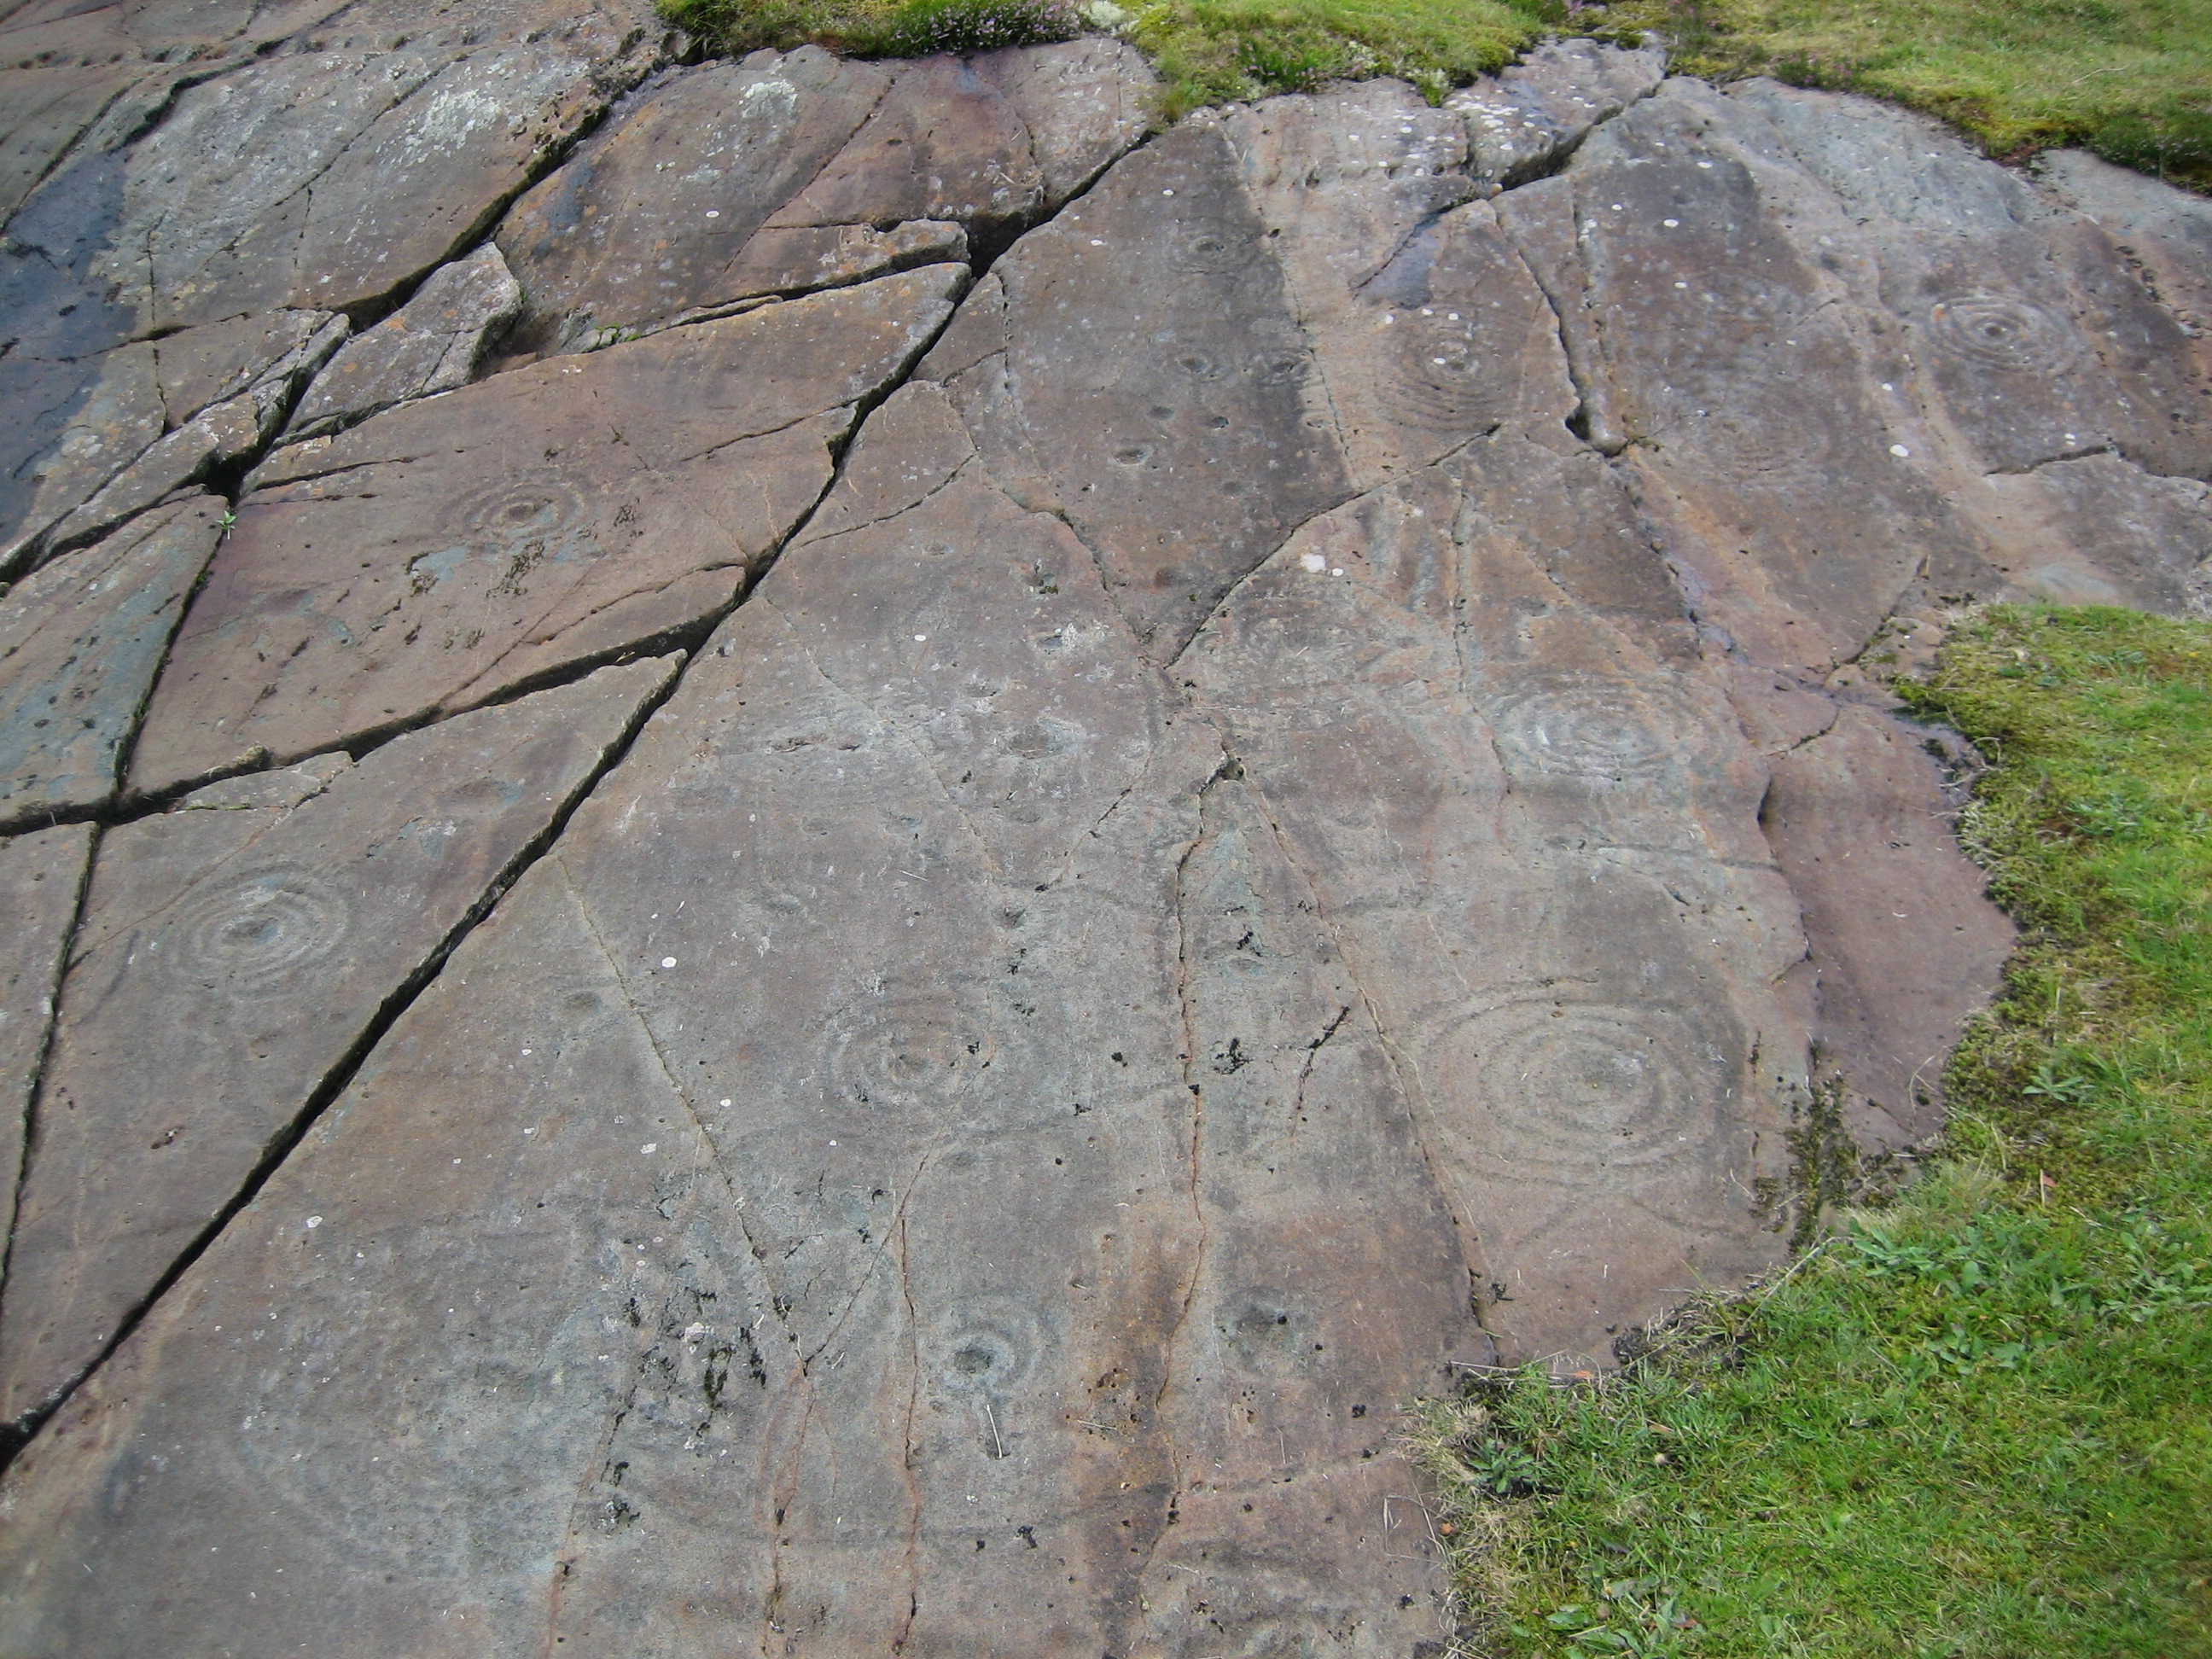 One section of the carved rocksheet